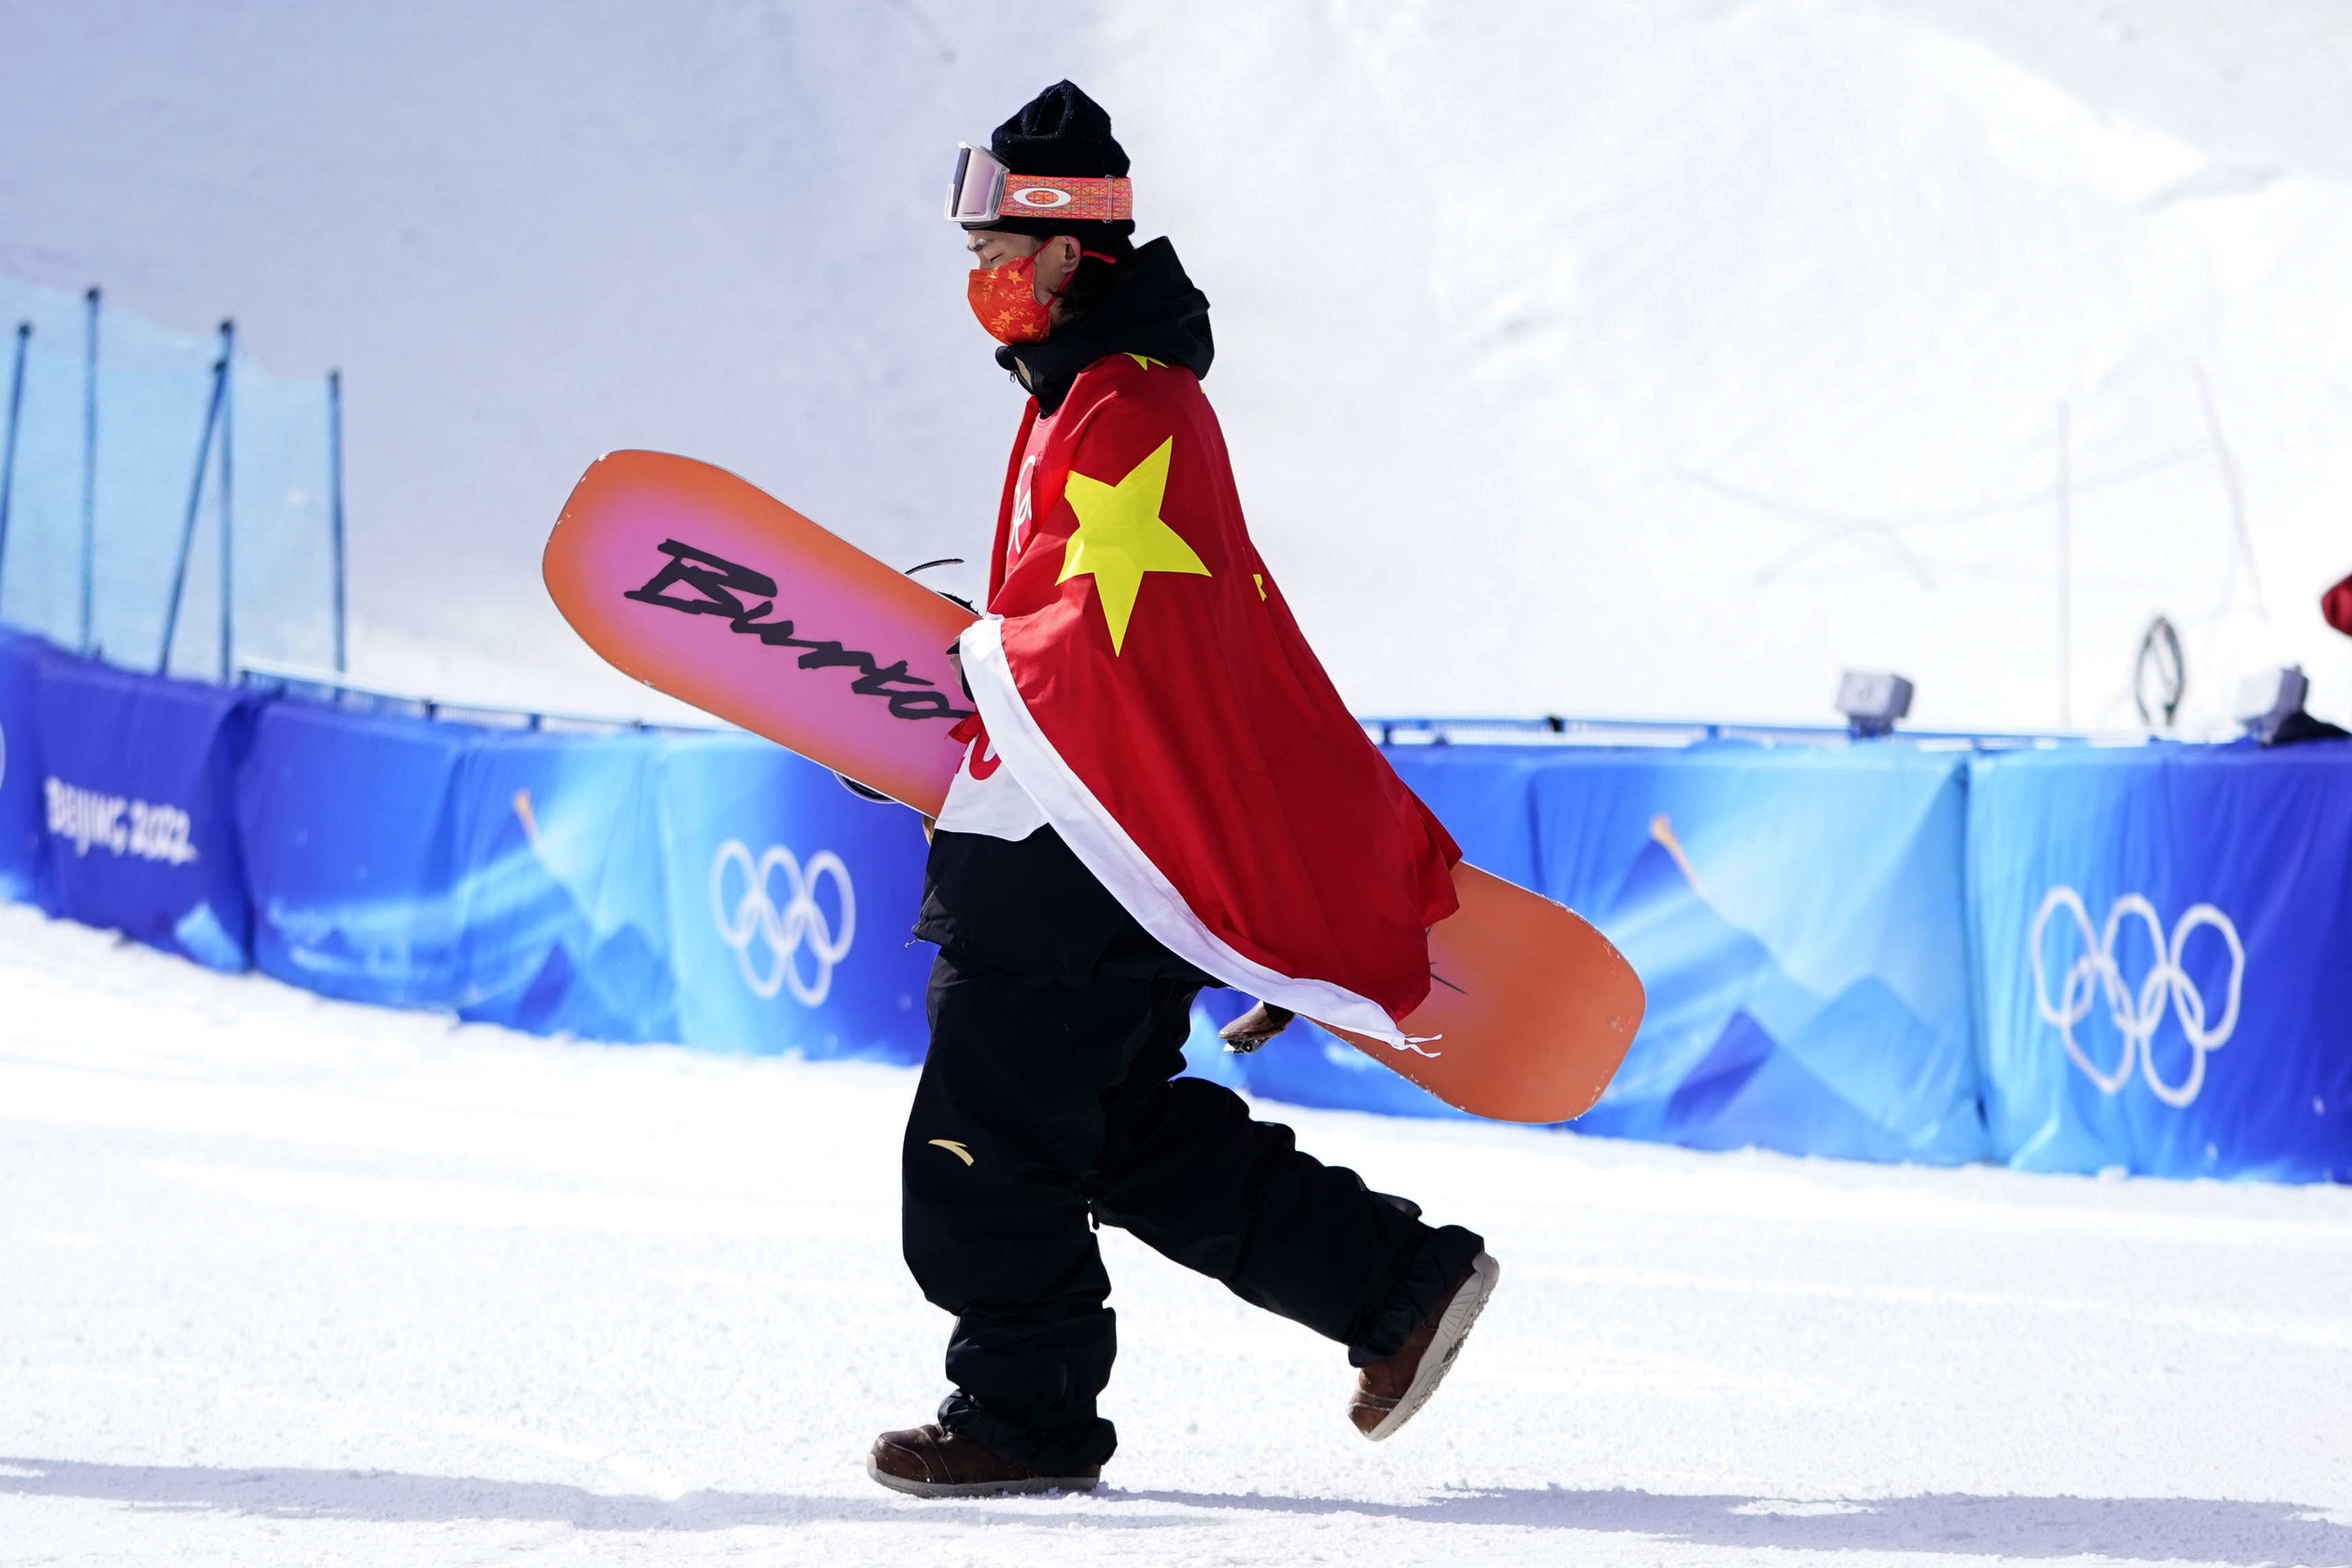 Olympic skier Eileen Gu defends China's internet restrictions